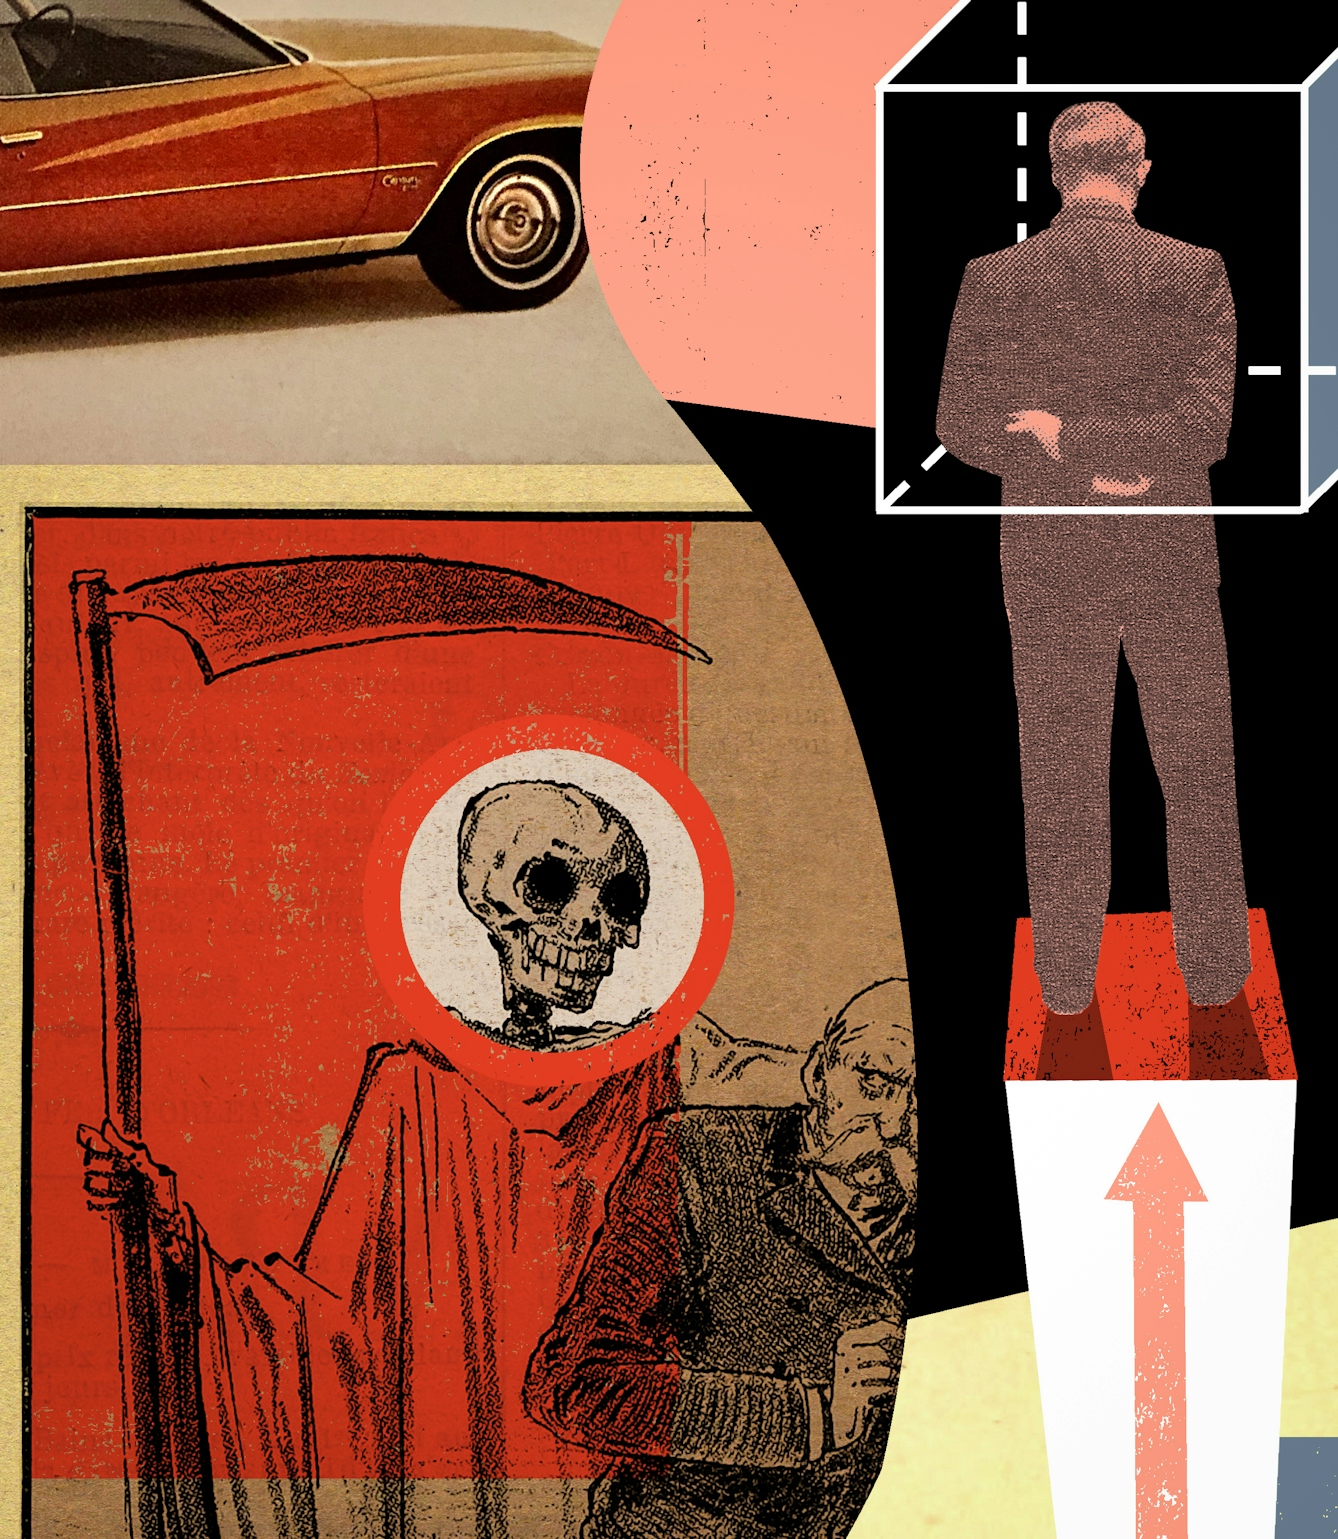 Detail from a larger digital montage artwork made up of archive illustrations, photographs and graphical shapes. The overall hues of the artwork are reds, yellows and blacks. There are a number of references across the artwork including a man trapped in a small box, a car and an image of the grim reaper standing behind a man.